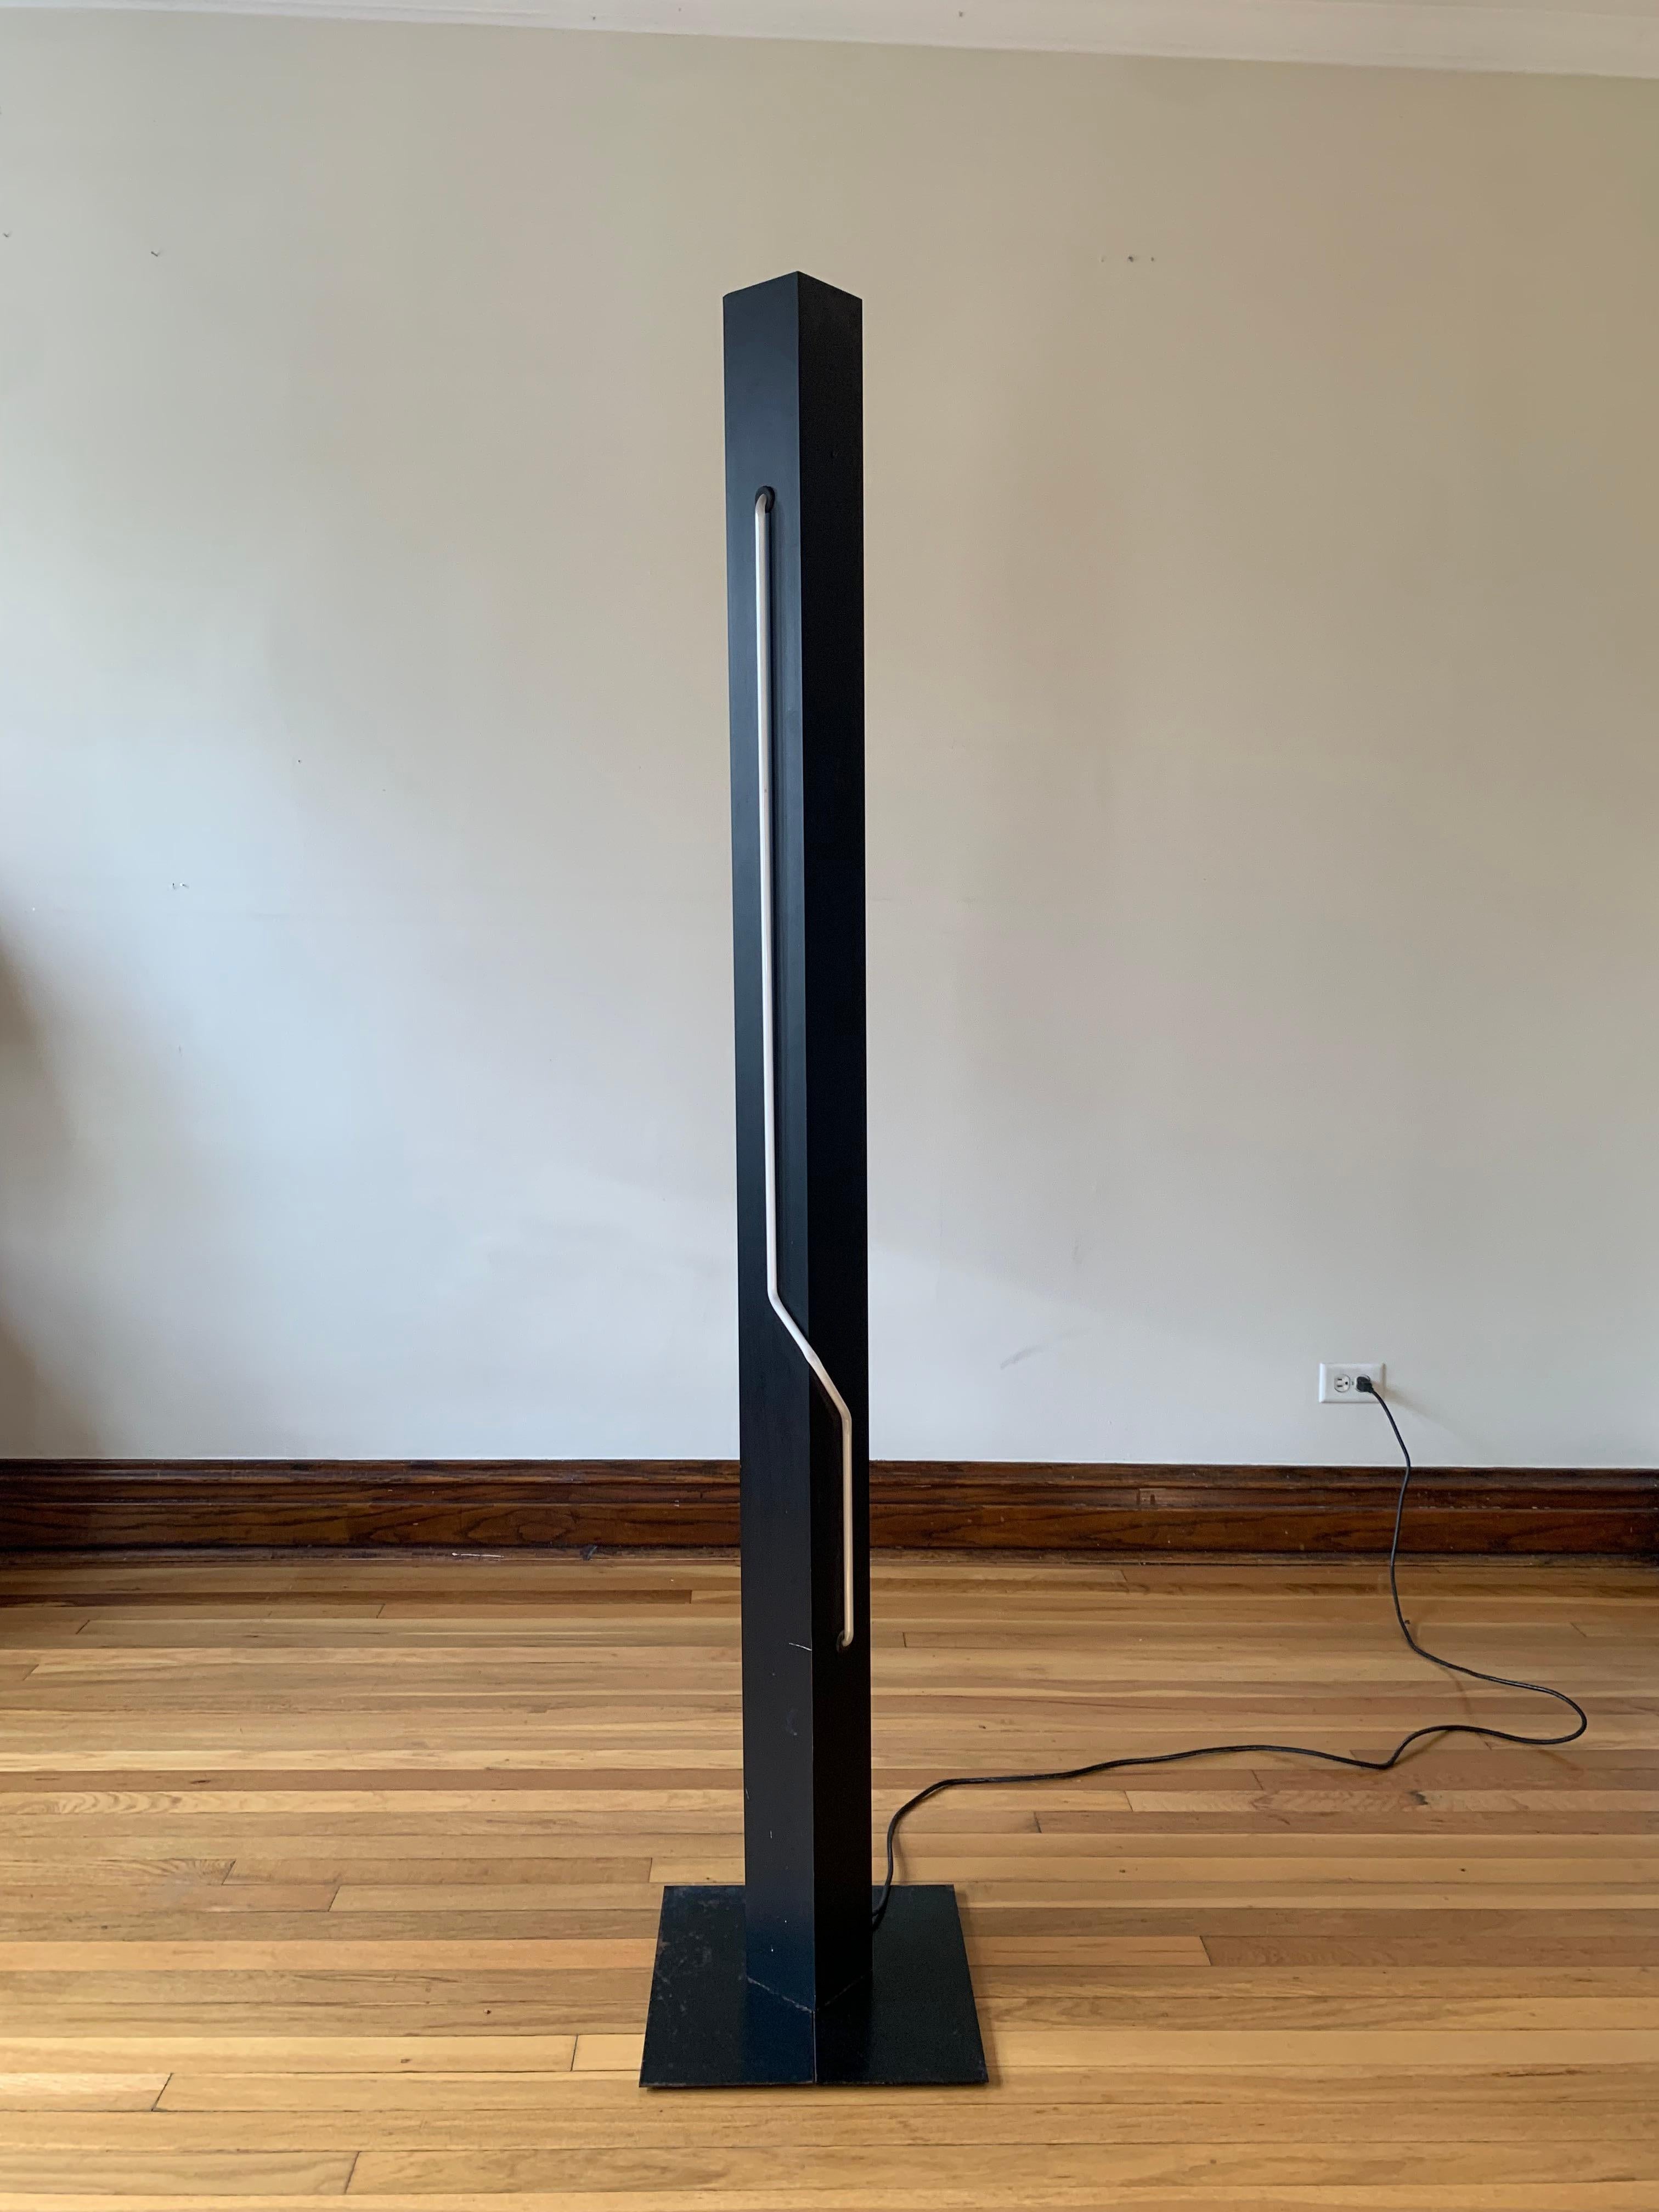 A true statement. Sculptural, monolithic torchiere with a magenta neon element designed by Dan Chelsea of Let There Be Neon, founded by Rudi Stern, in collaboration with George Kovacs. A total must have for any fan of the eclectic and post-modern,